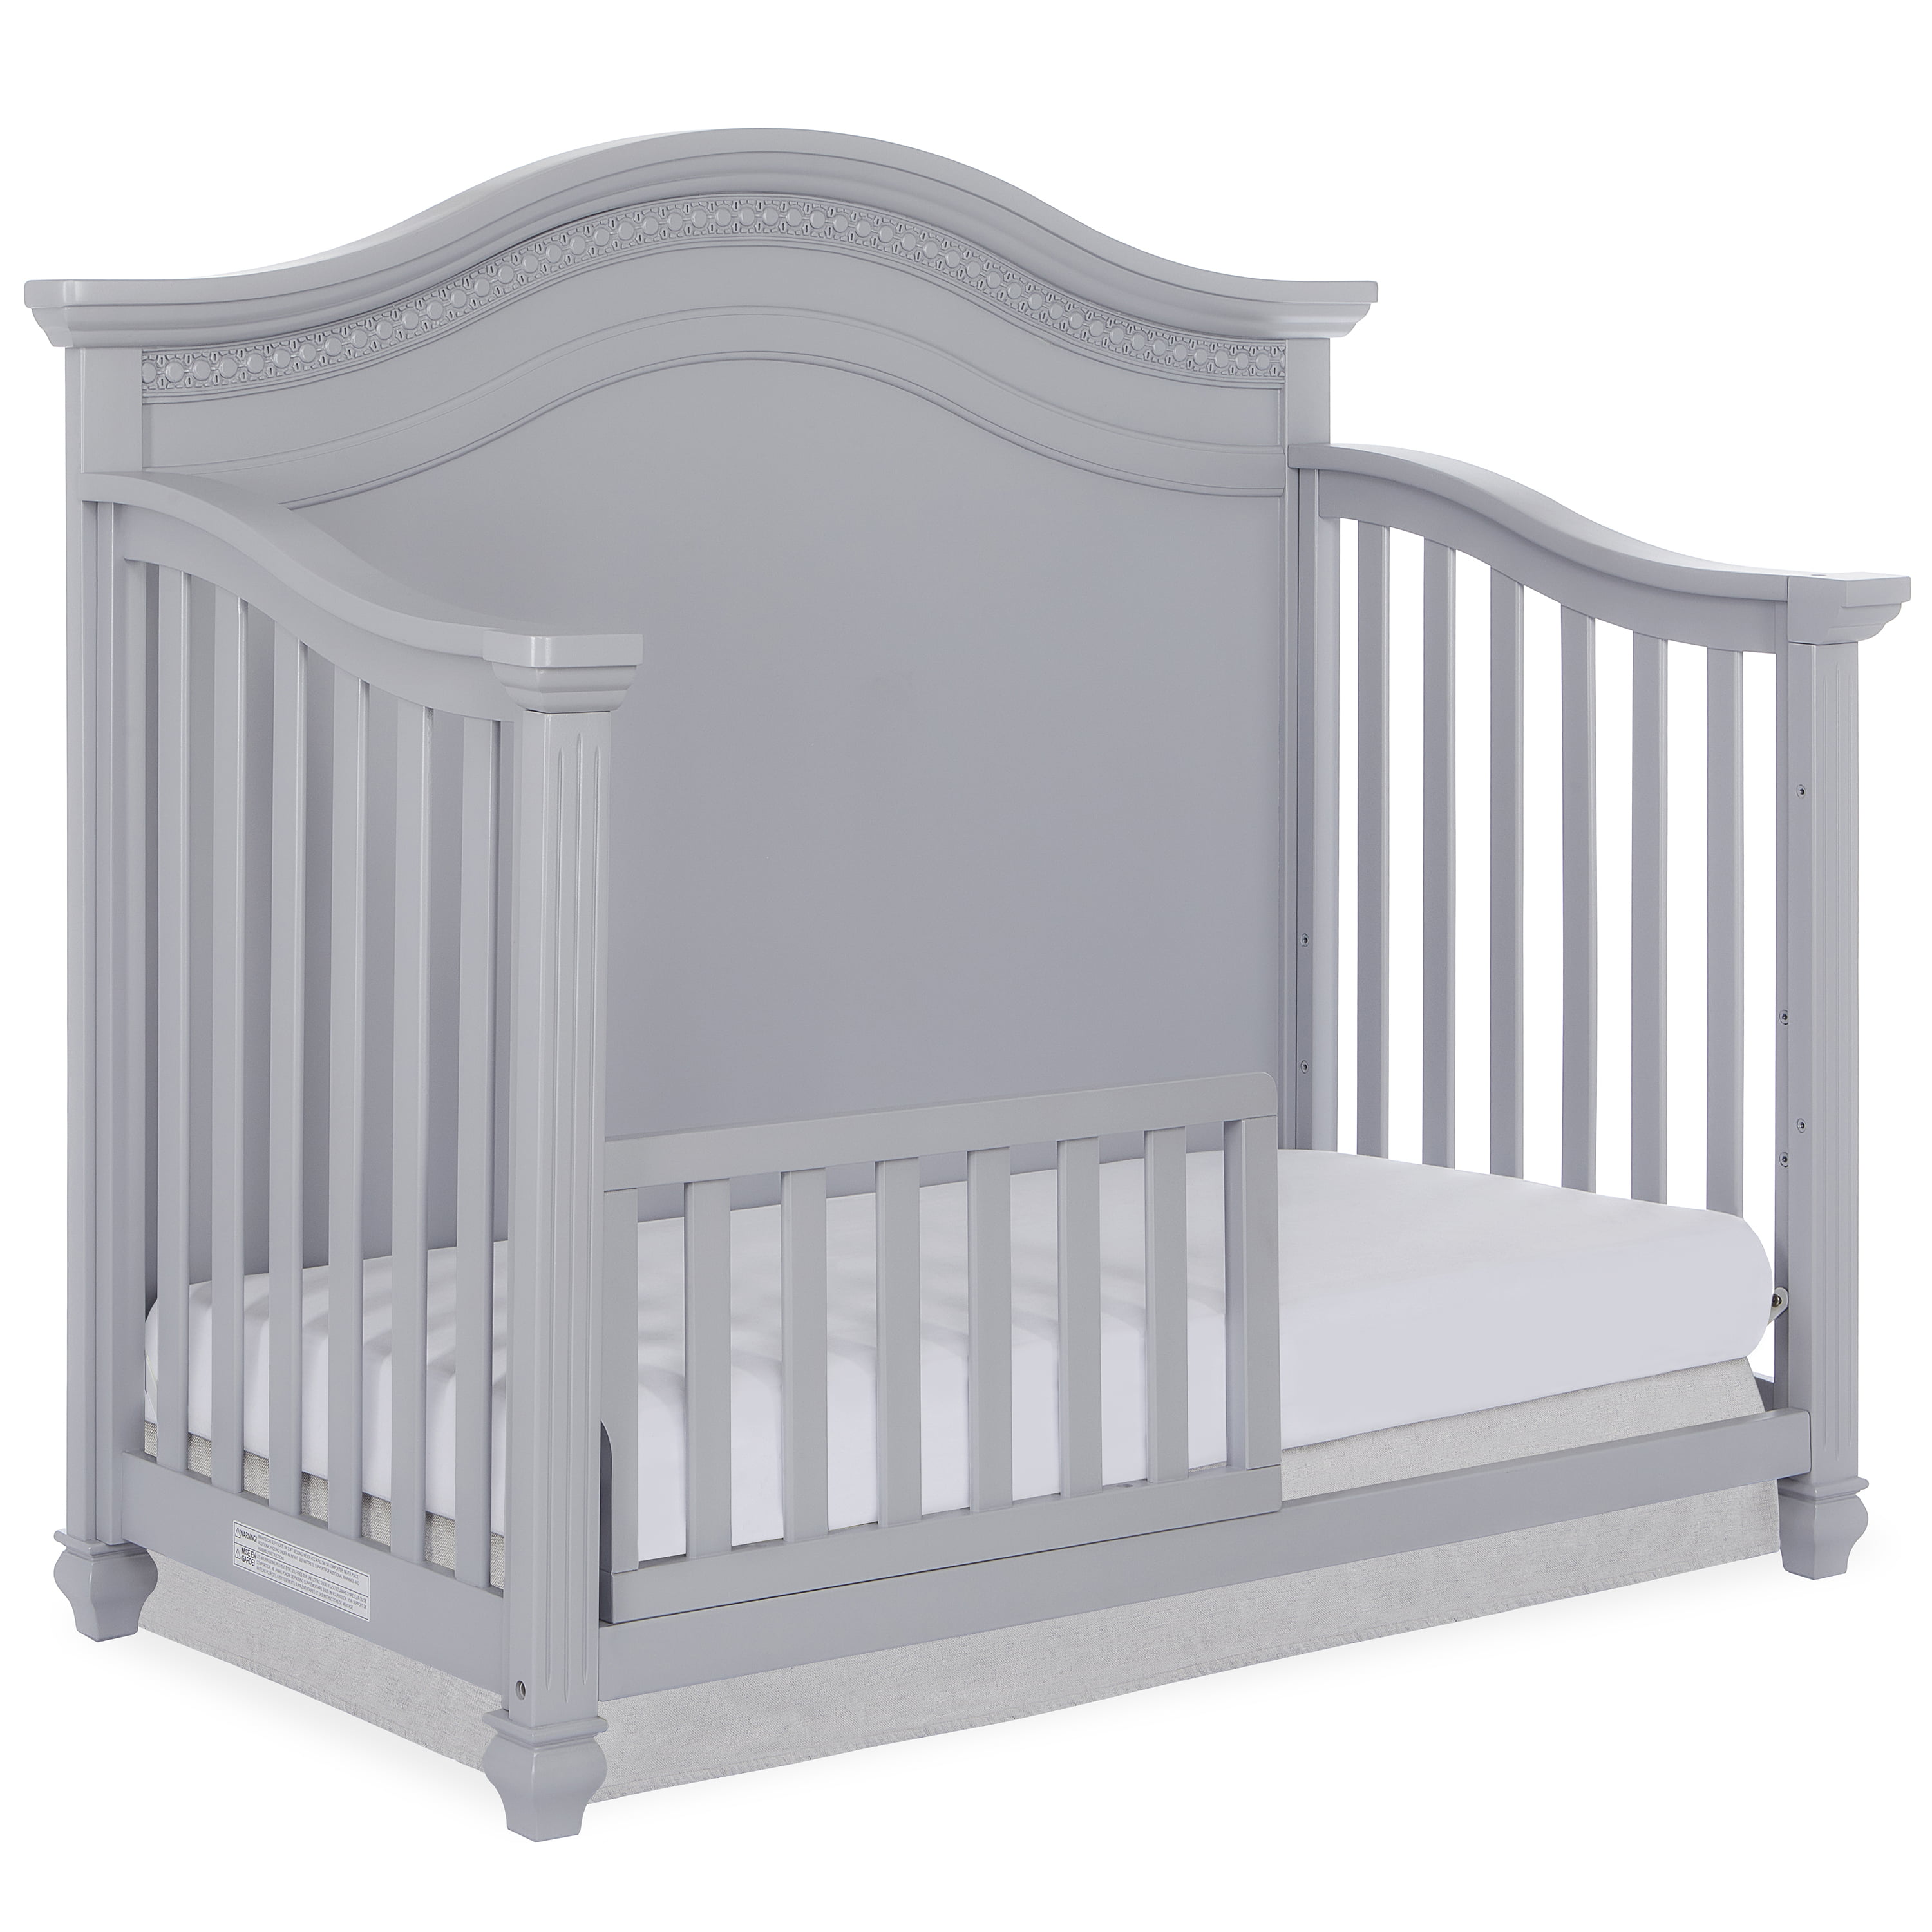 Evolur Madison 5 in 1 Curved Top Convertible Crib Silver Shimmer 